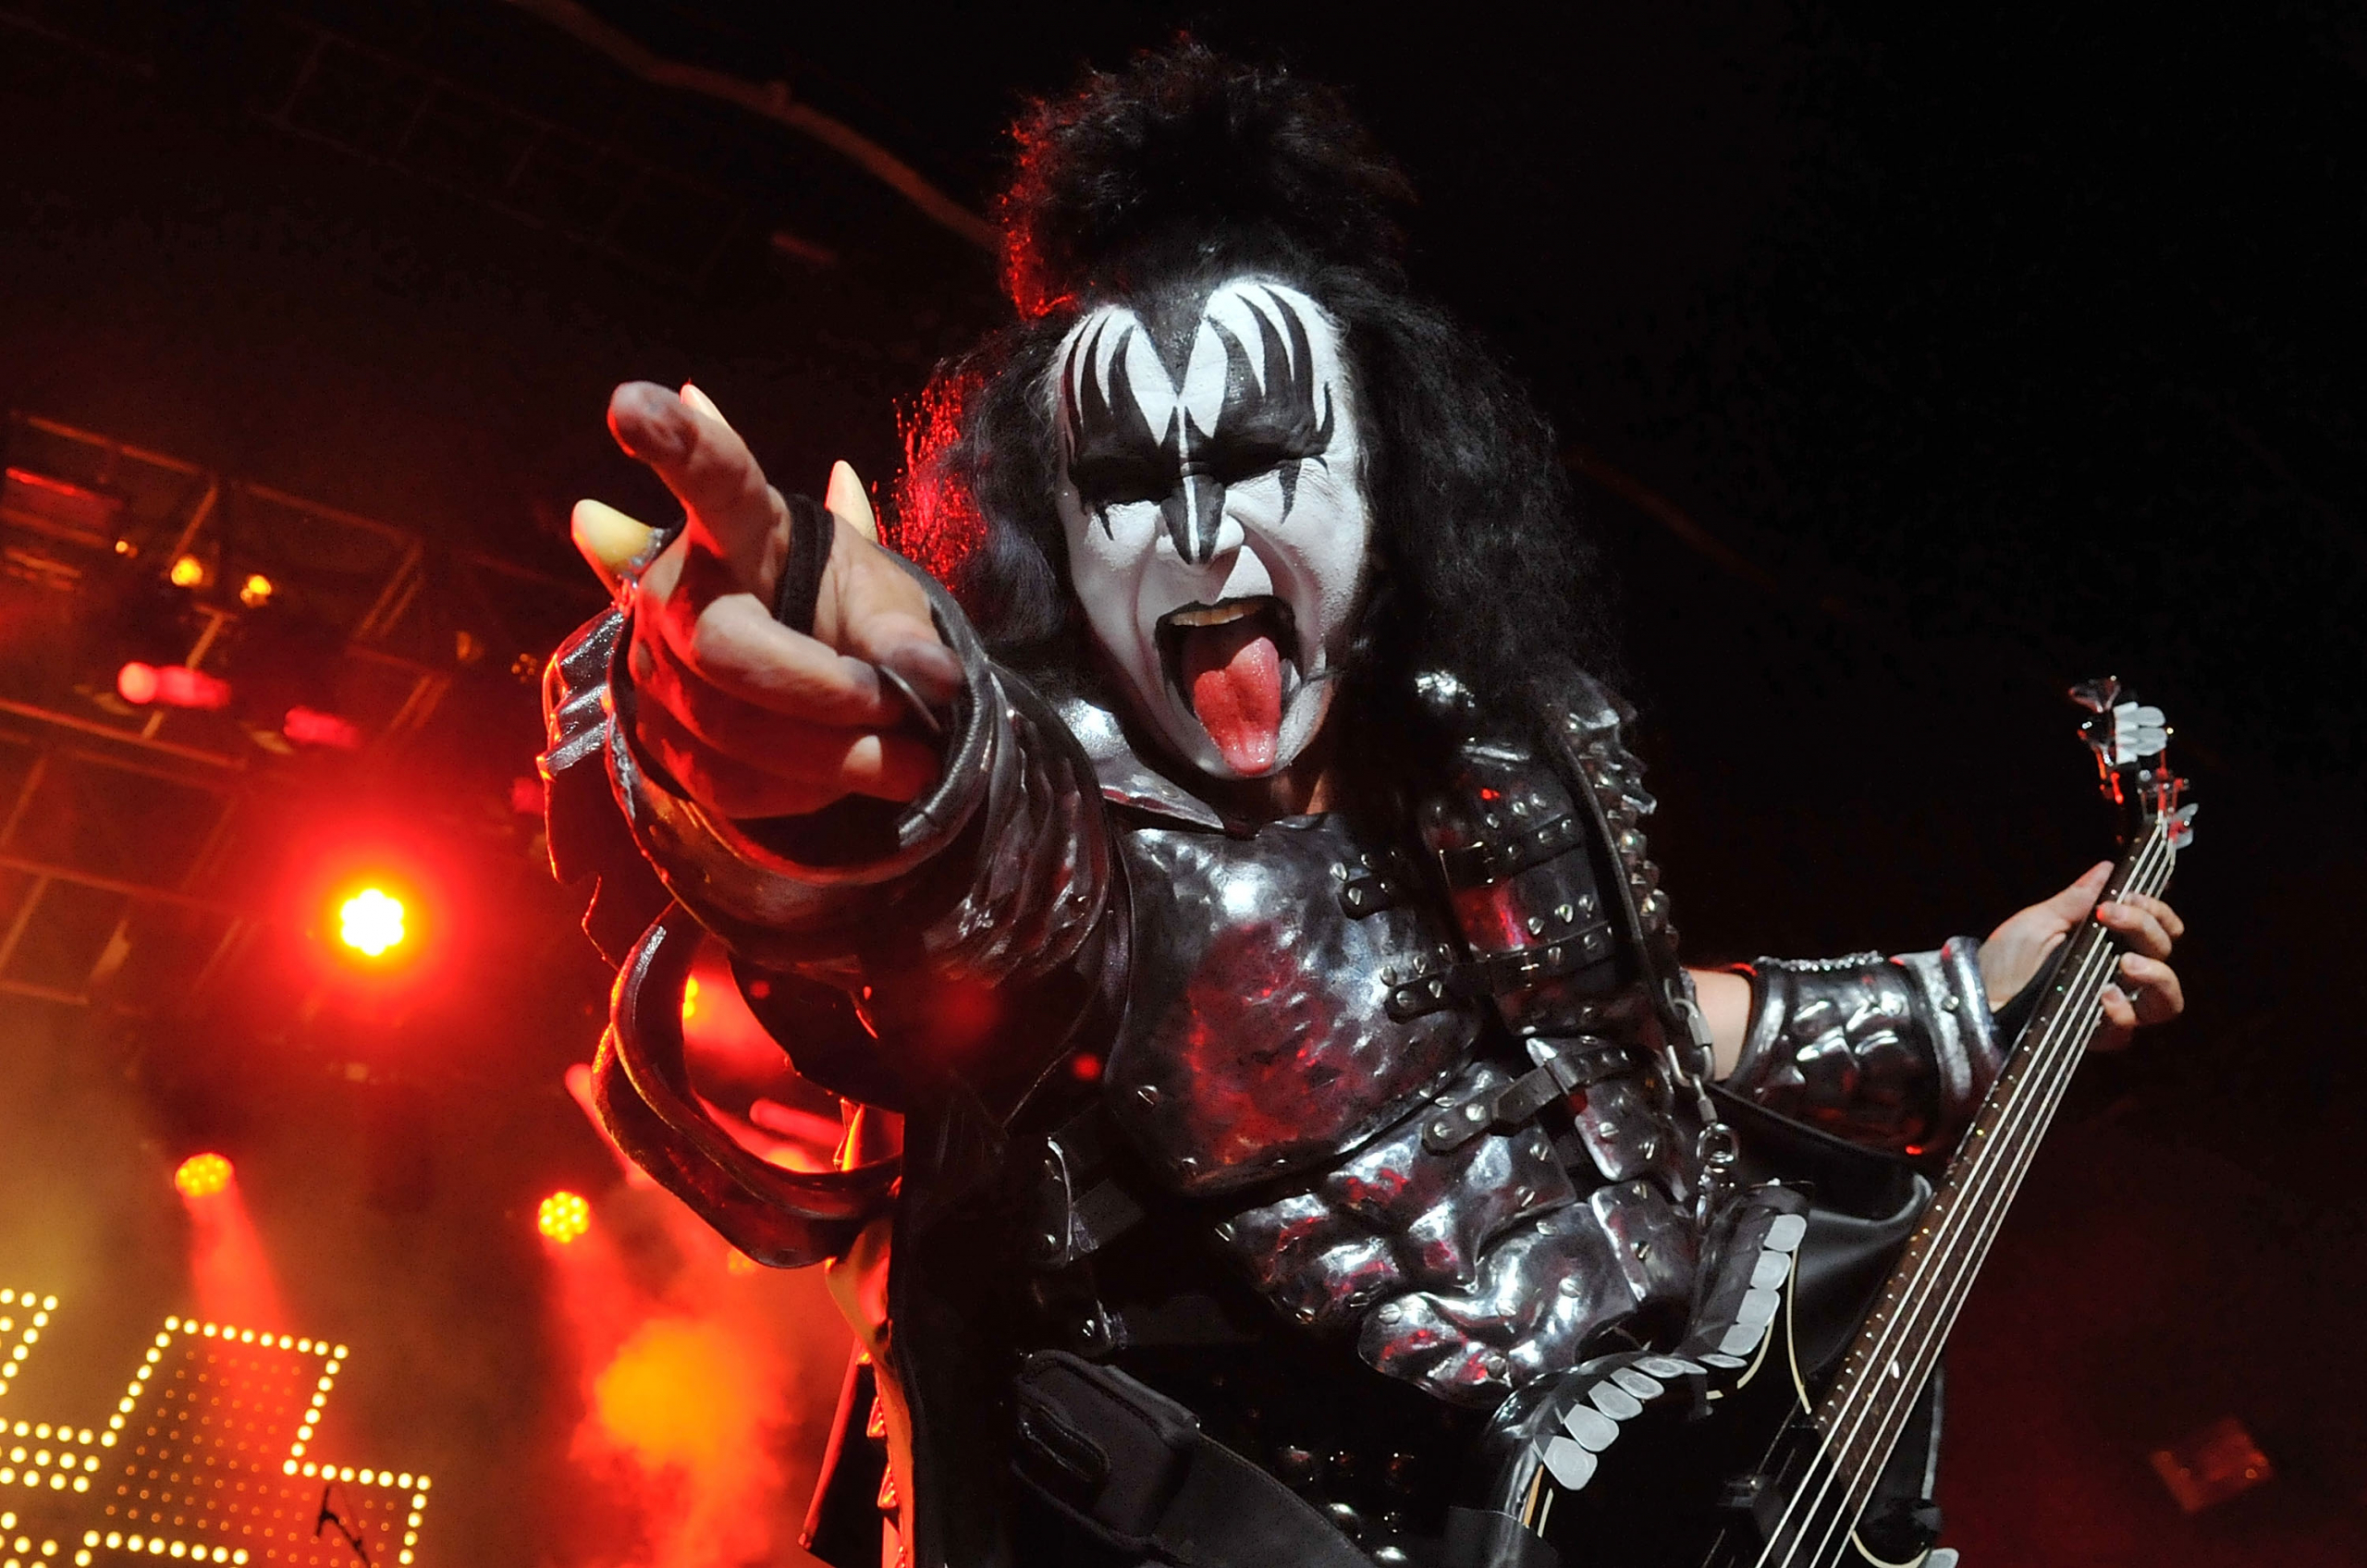 Gene Simmons says he, “Has no friends.”